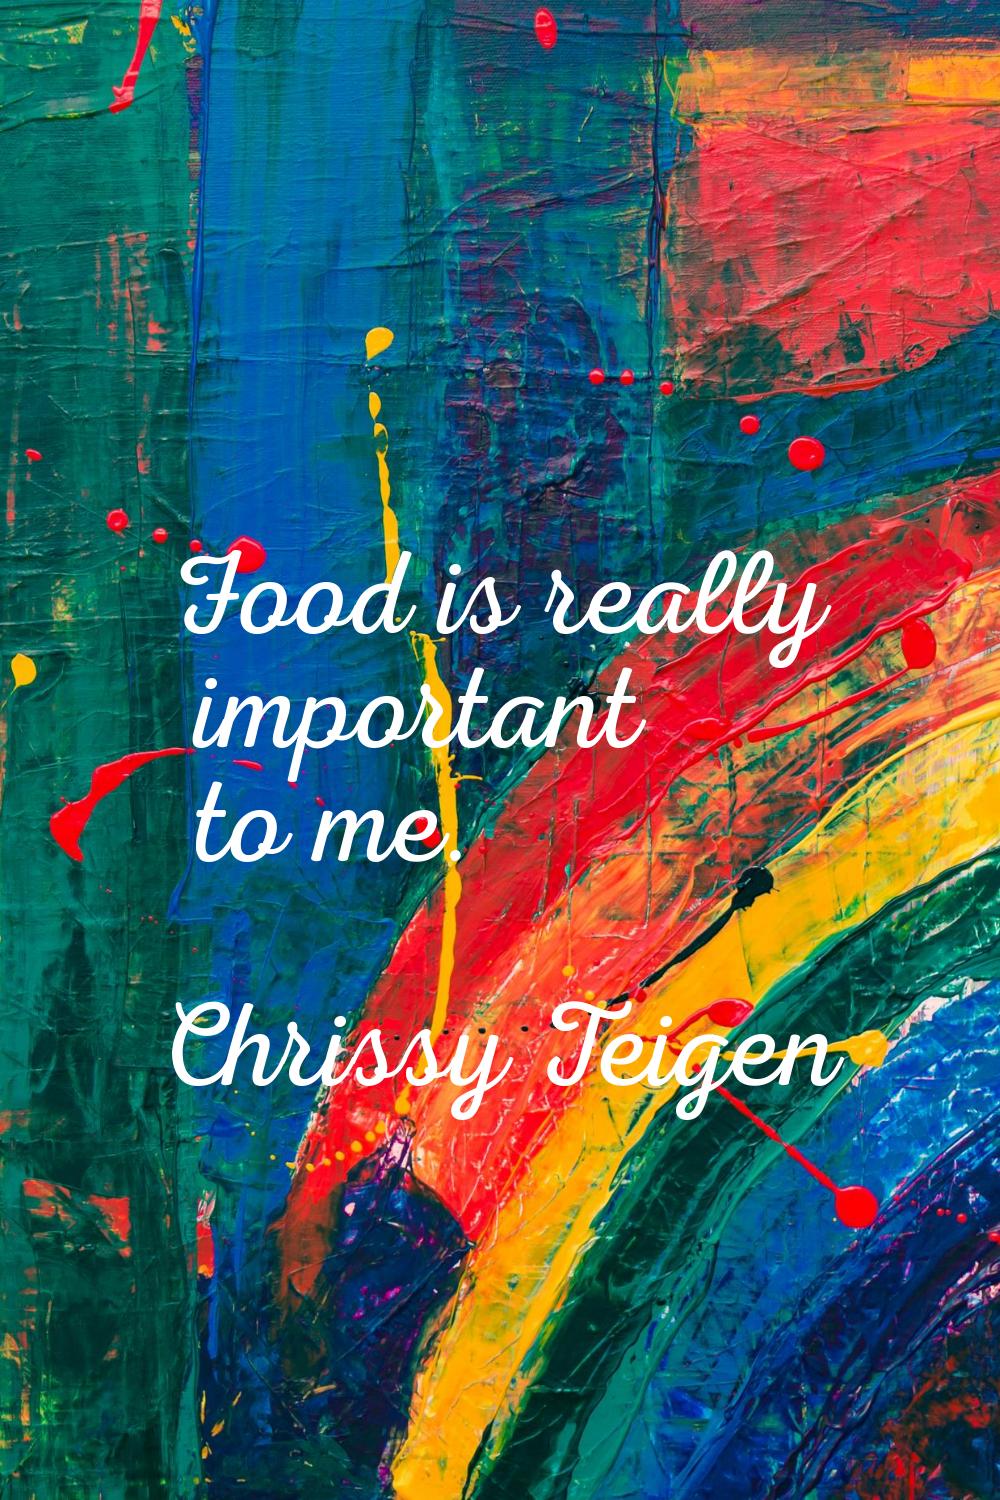 Food is really important to me.